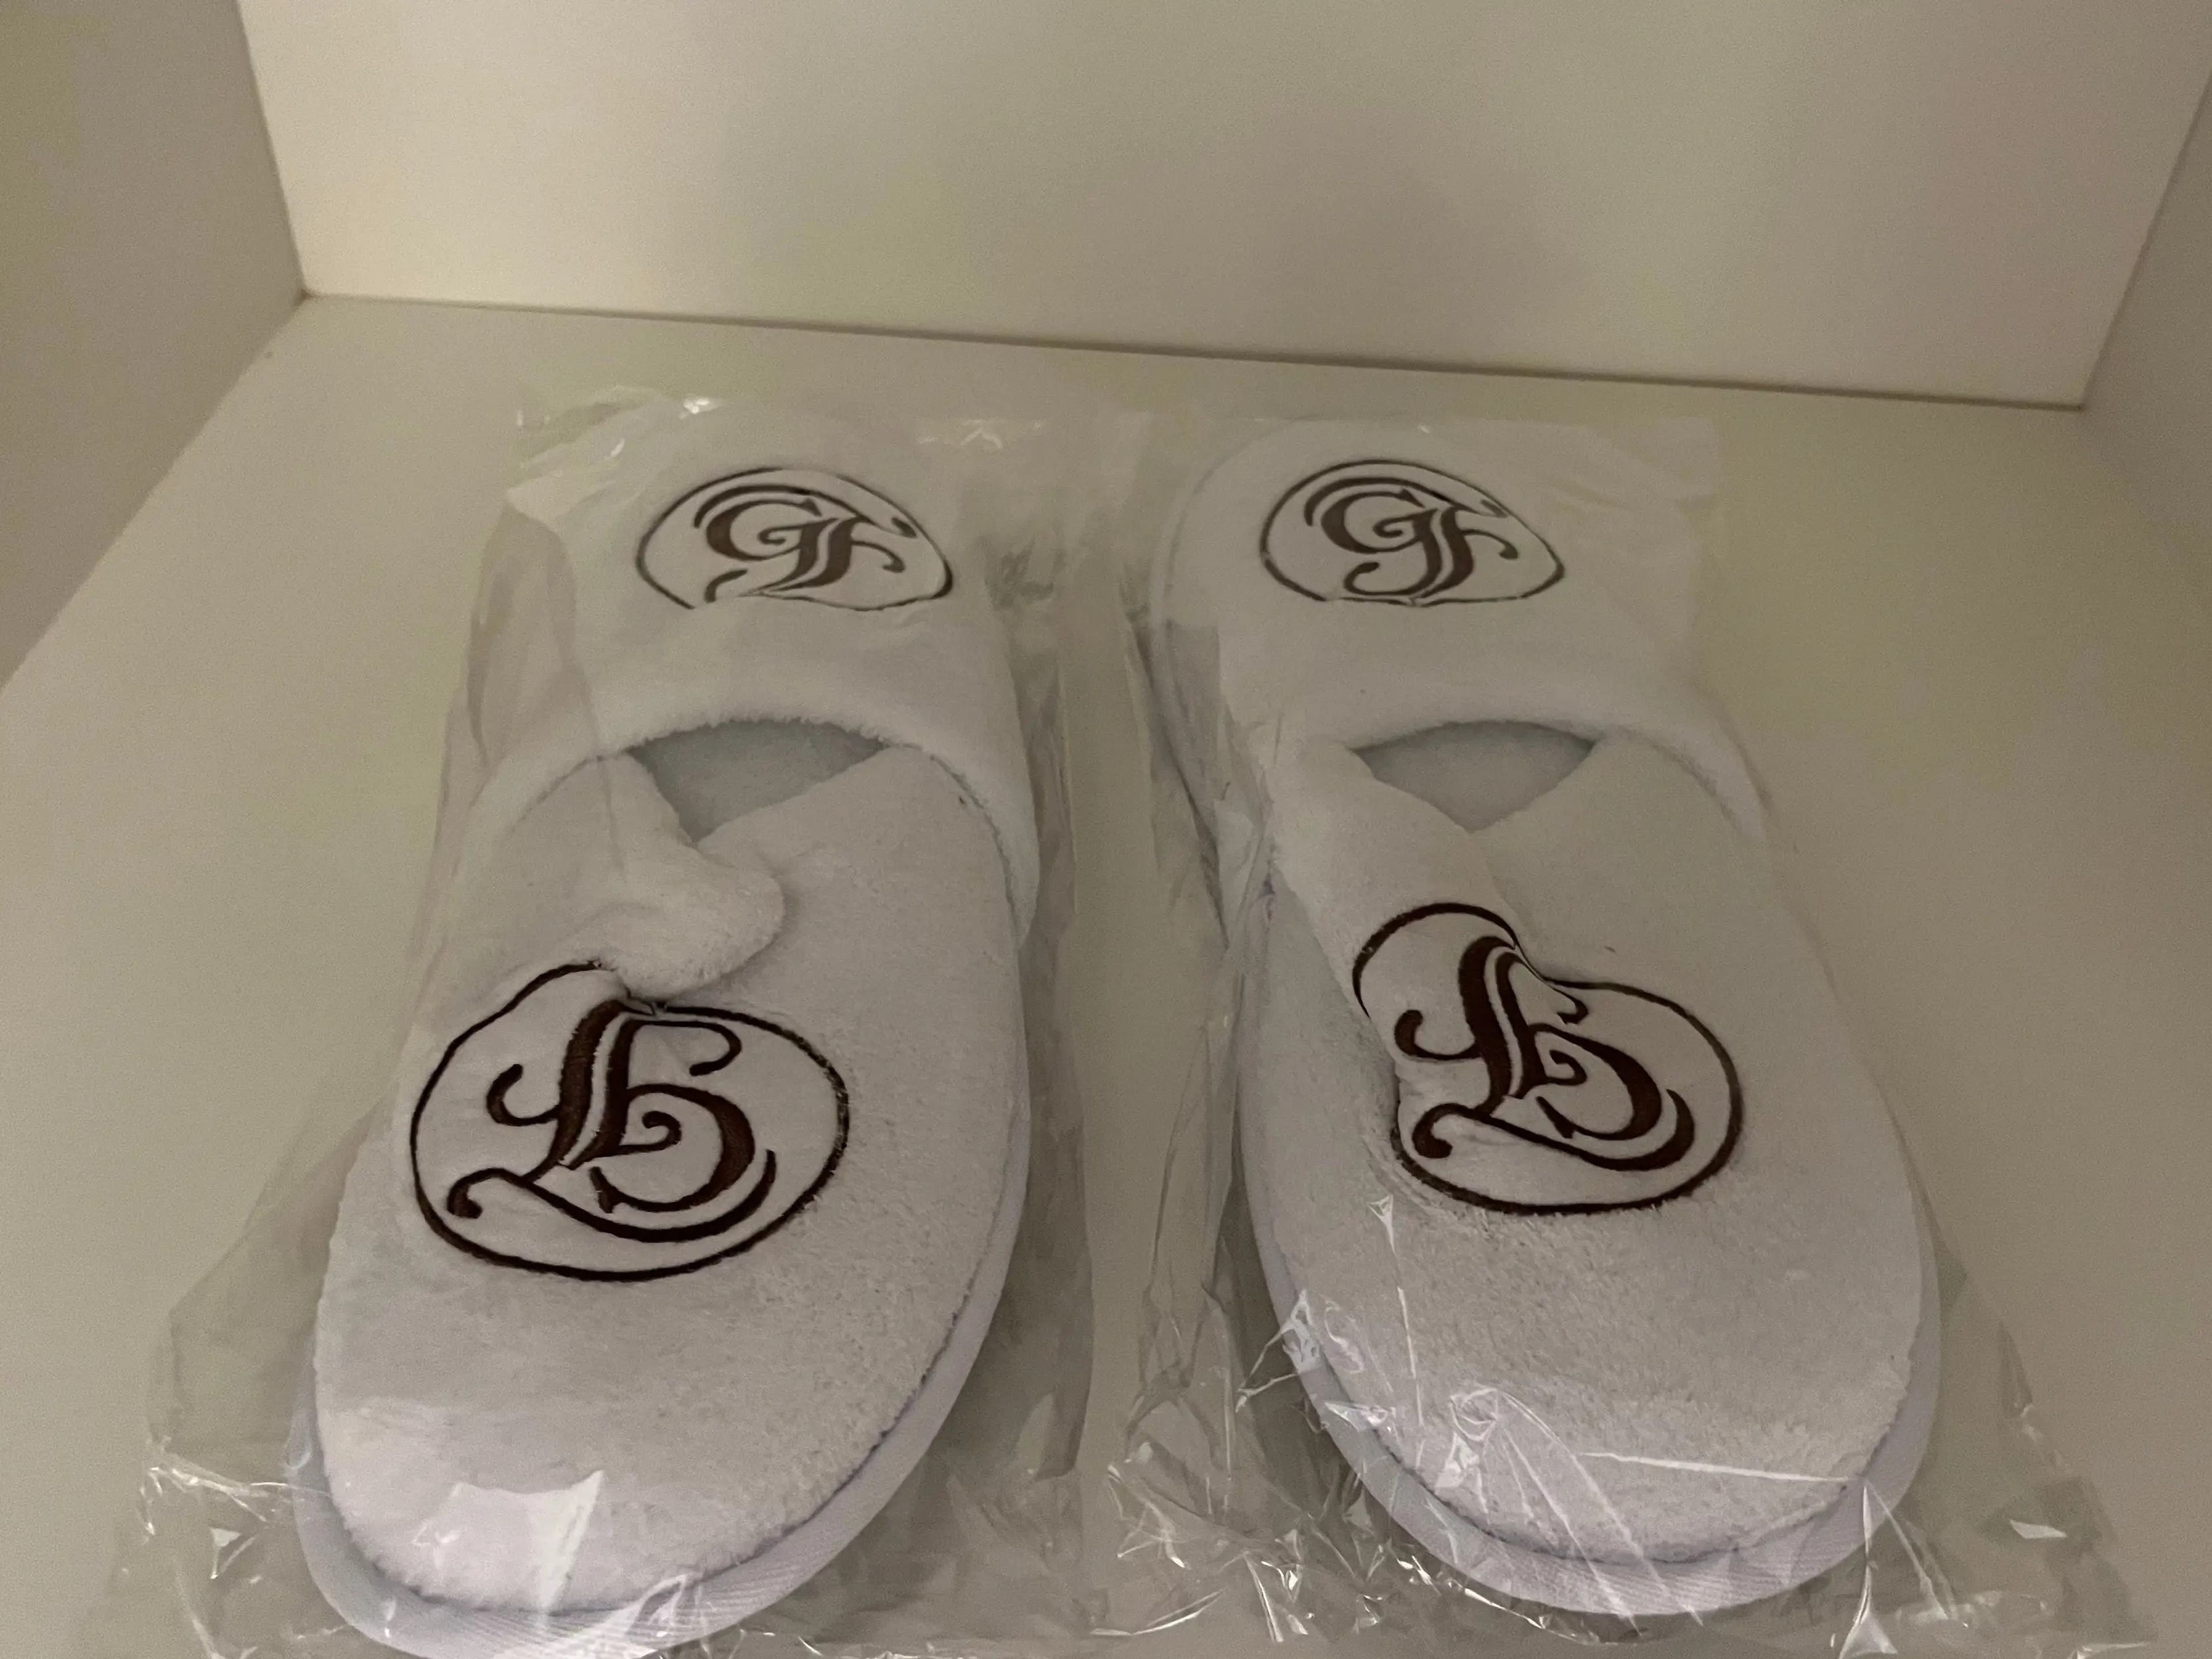 two pairs of white grand floridian slippers in plastic wrappings in a closet inside a room at the grand floridian resort